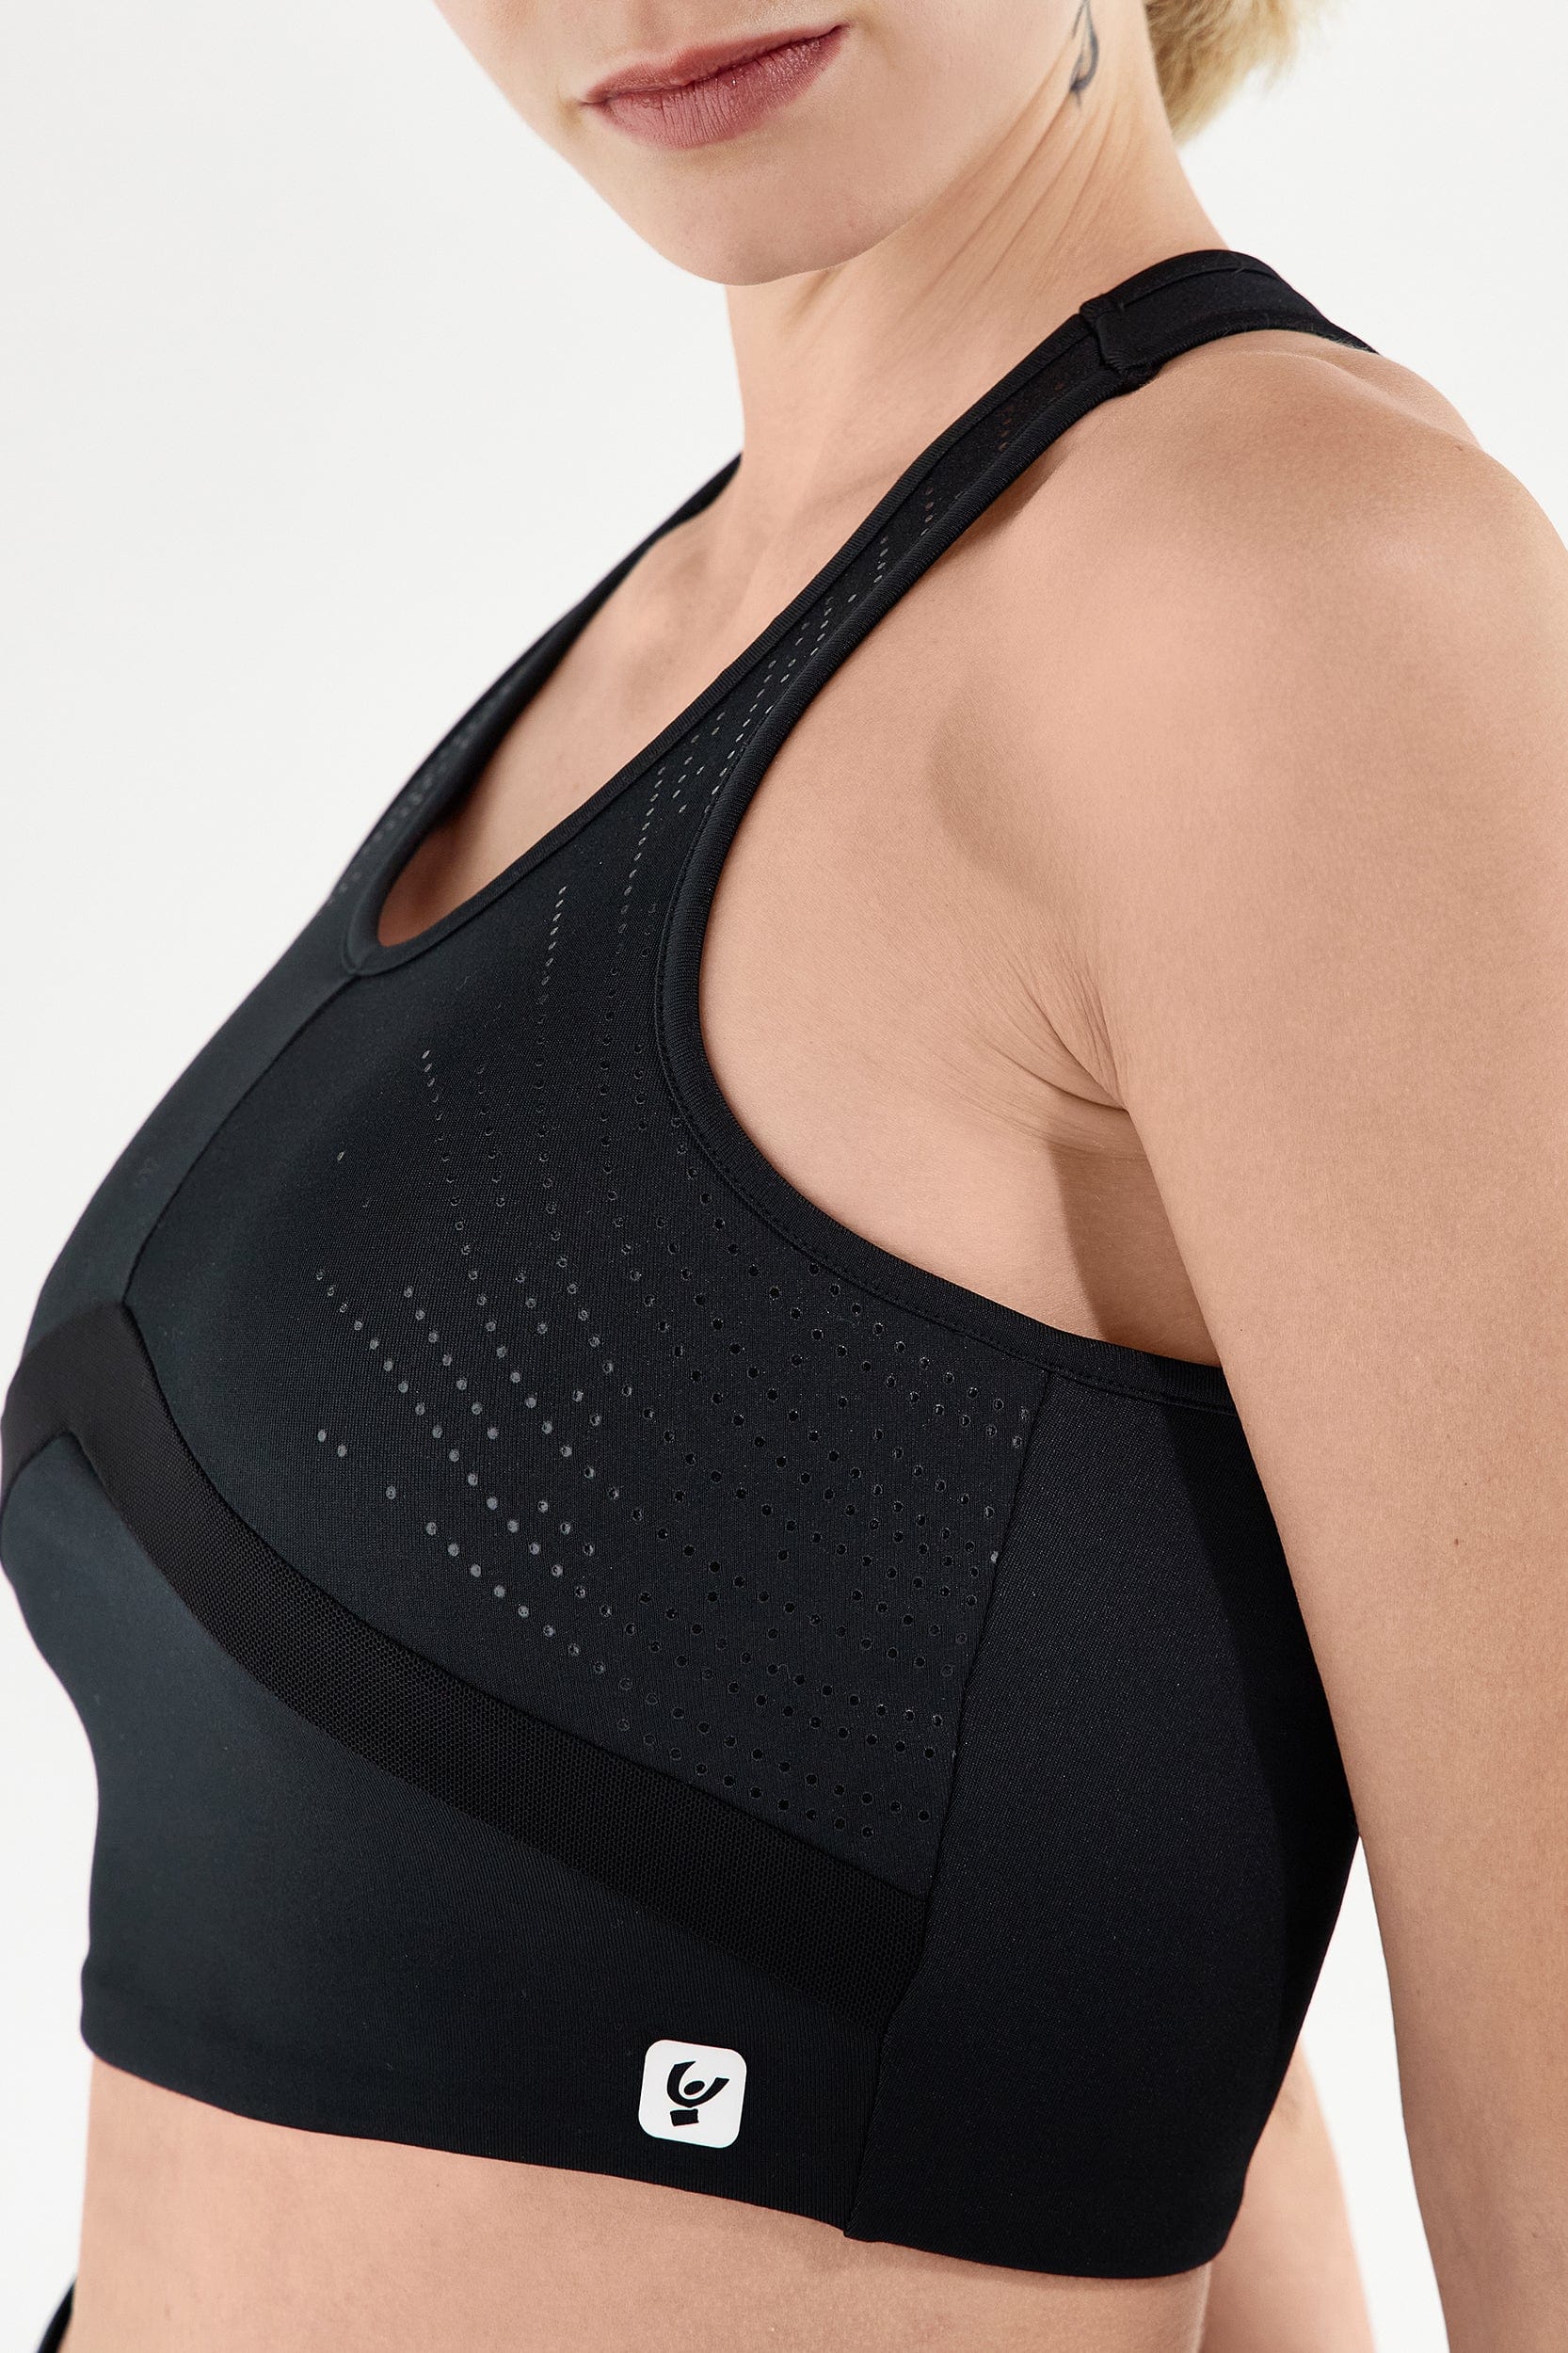 Breathable Sports Bra - Black with Dotted Details 3